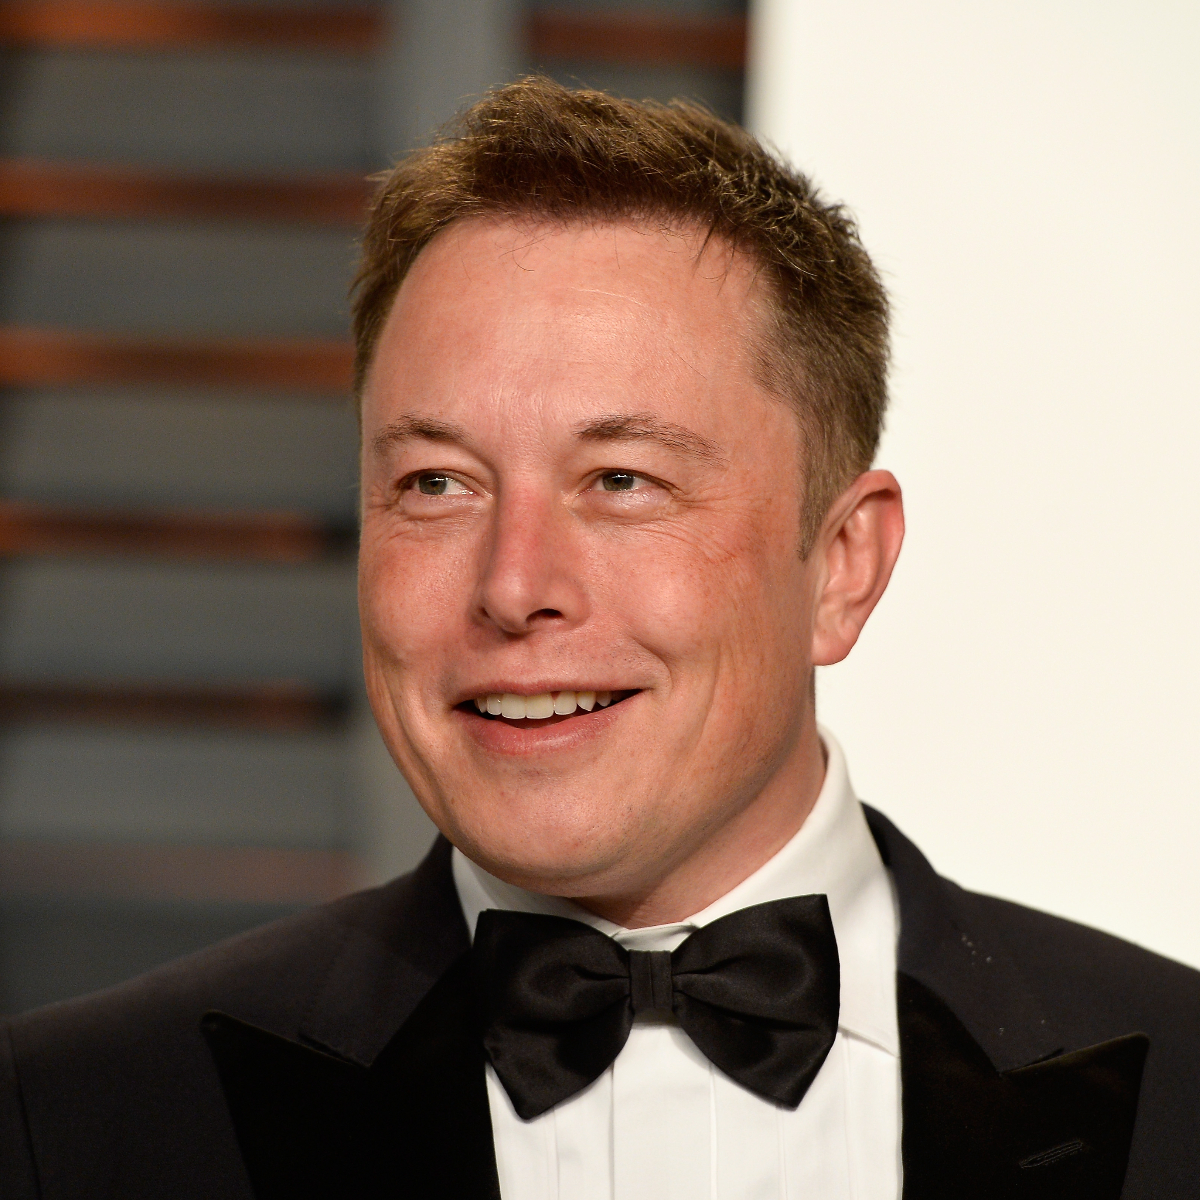 Elon Musk Car Collection: Here are the 6 cars Tesla CEO owns